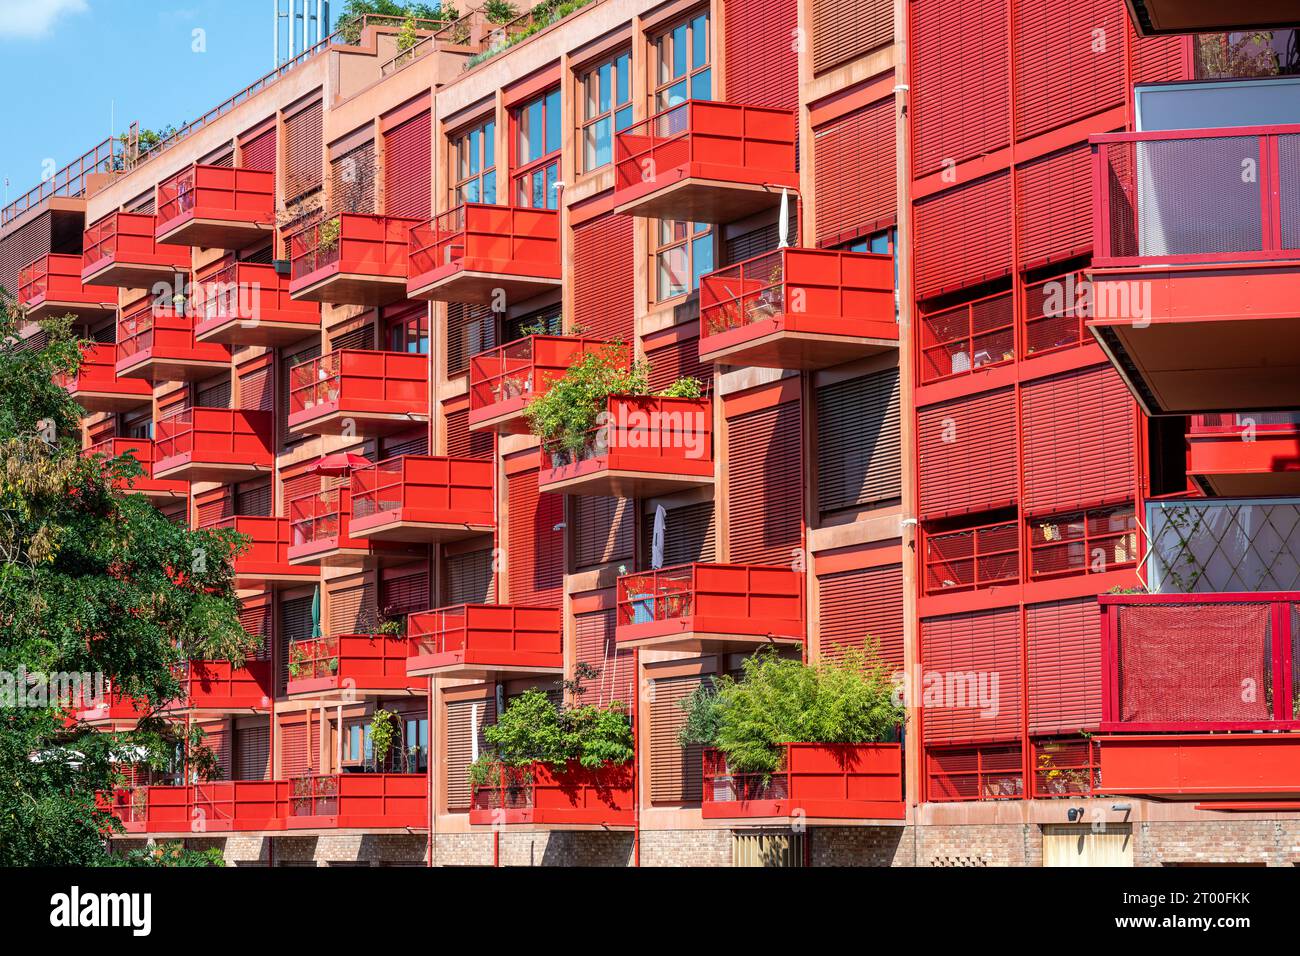 Modern red apartment building with balconies seen in Berlin, Germany Stock Photo